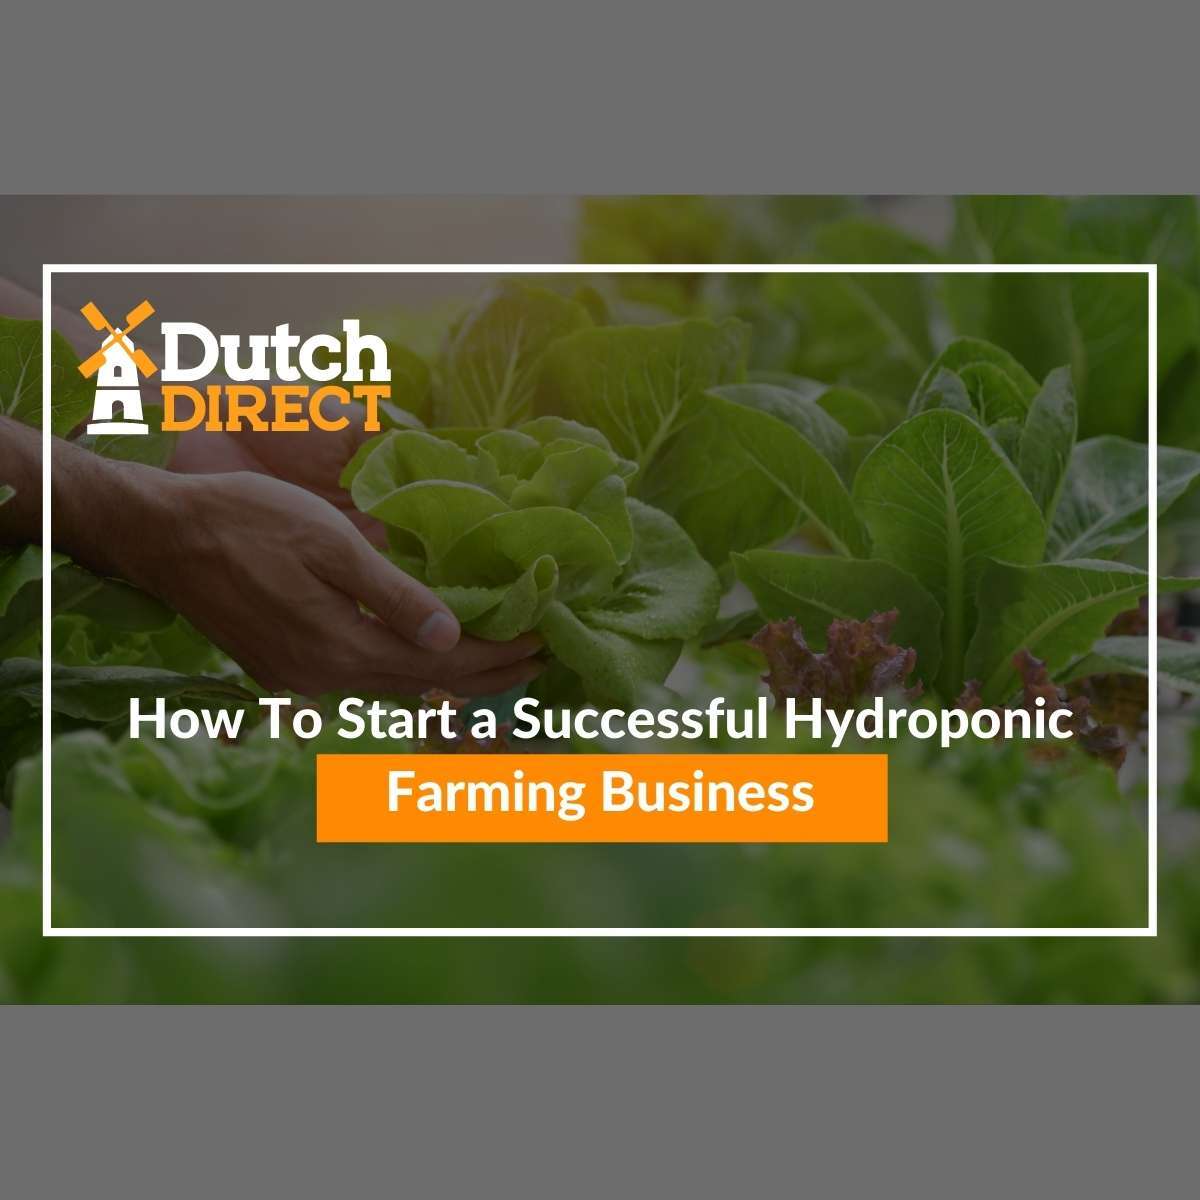 How To Start a Successful Hydroponic Farming Business